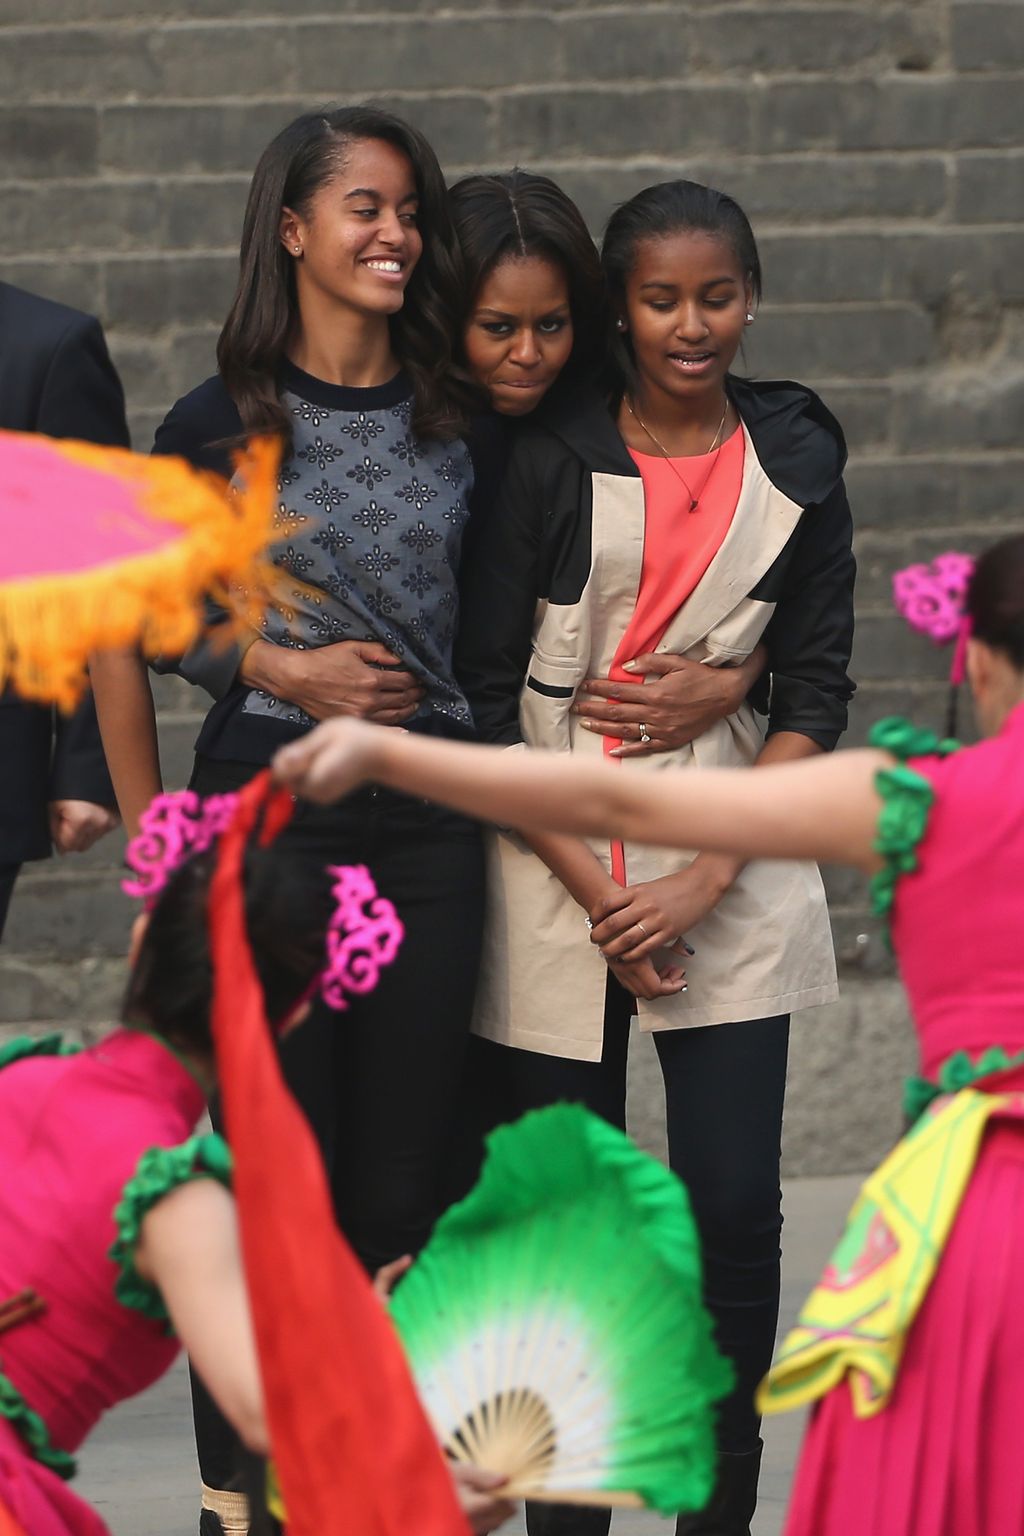 XI'AN, CHINA - MARCH 24:  First Lady Michelle Obama (Center) with her daughters Malia Obama (Left) and Sasha Obama (Right), mother Marian Robinson visit the Xi'an City Wall on March 24, 2014 in Xi'an, China. Michelle Obama's one-week-long visit in China will be focused on educational and cultural exchanges.  Michelle Obama's one-week-long visit in China will be focused on educational and cultural exchanges.  (Photo by Feng Li/Getty Images)